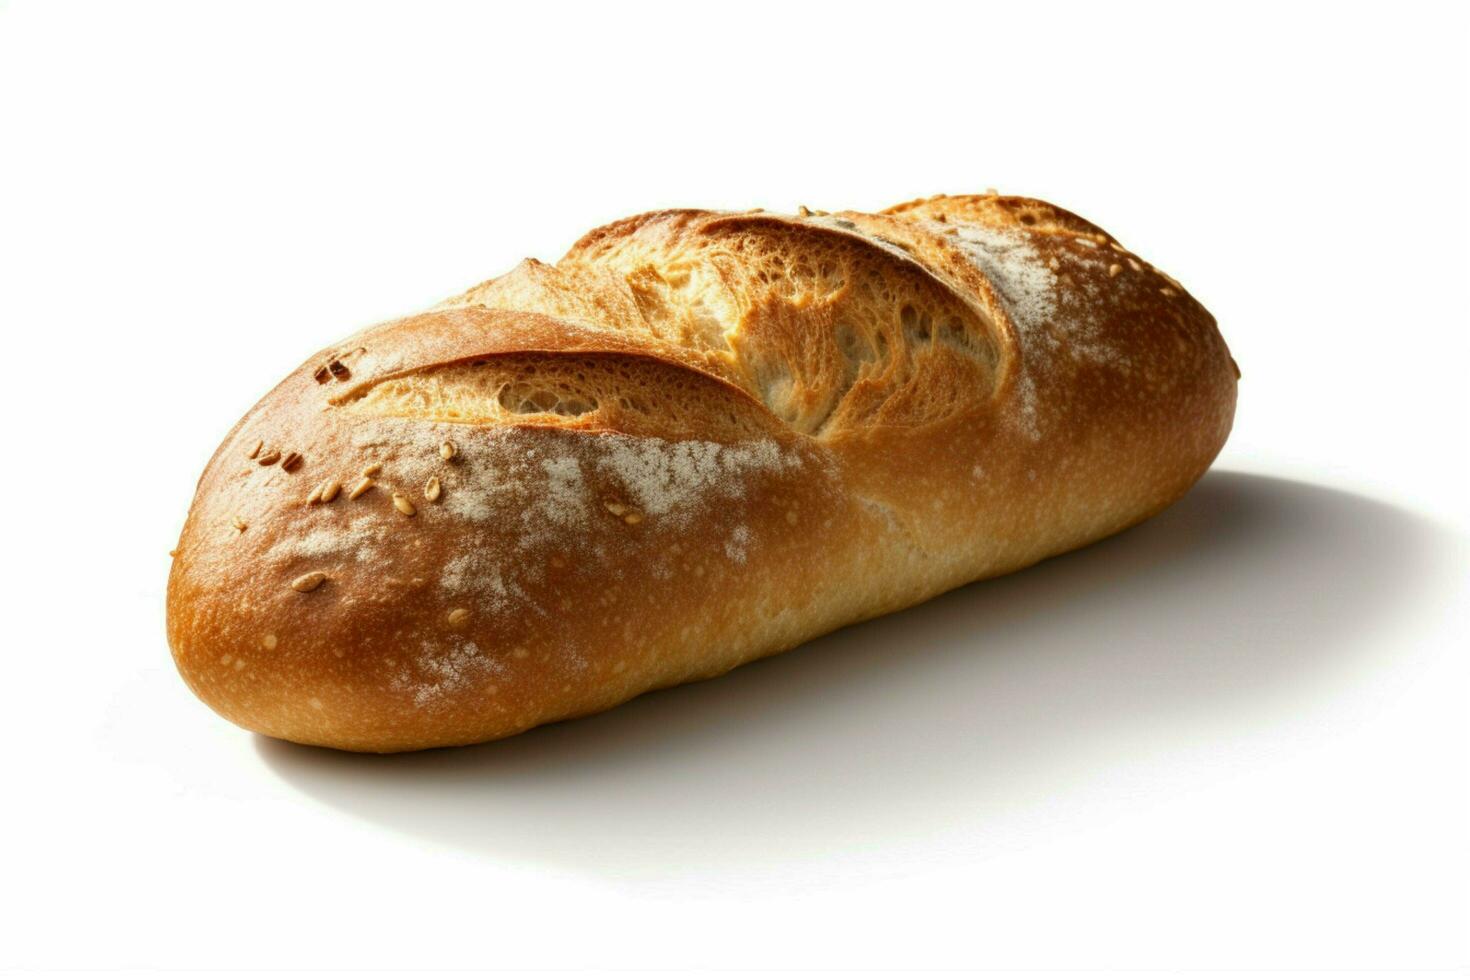 photo of Italian bread with no background